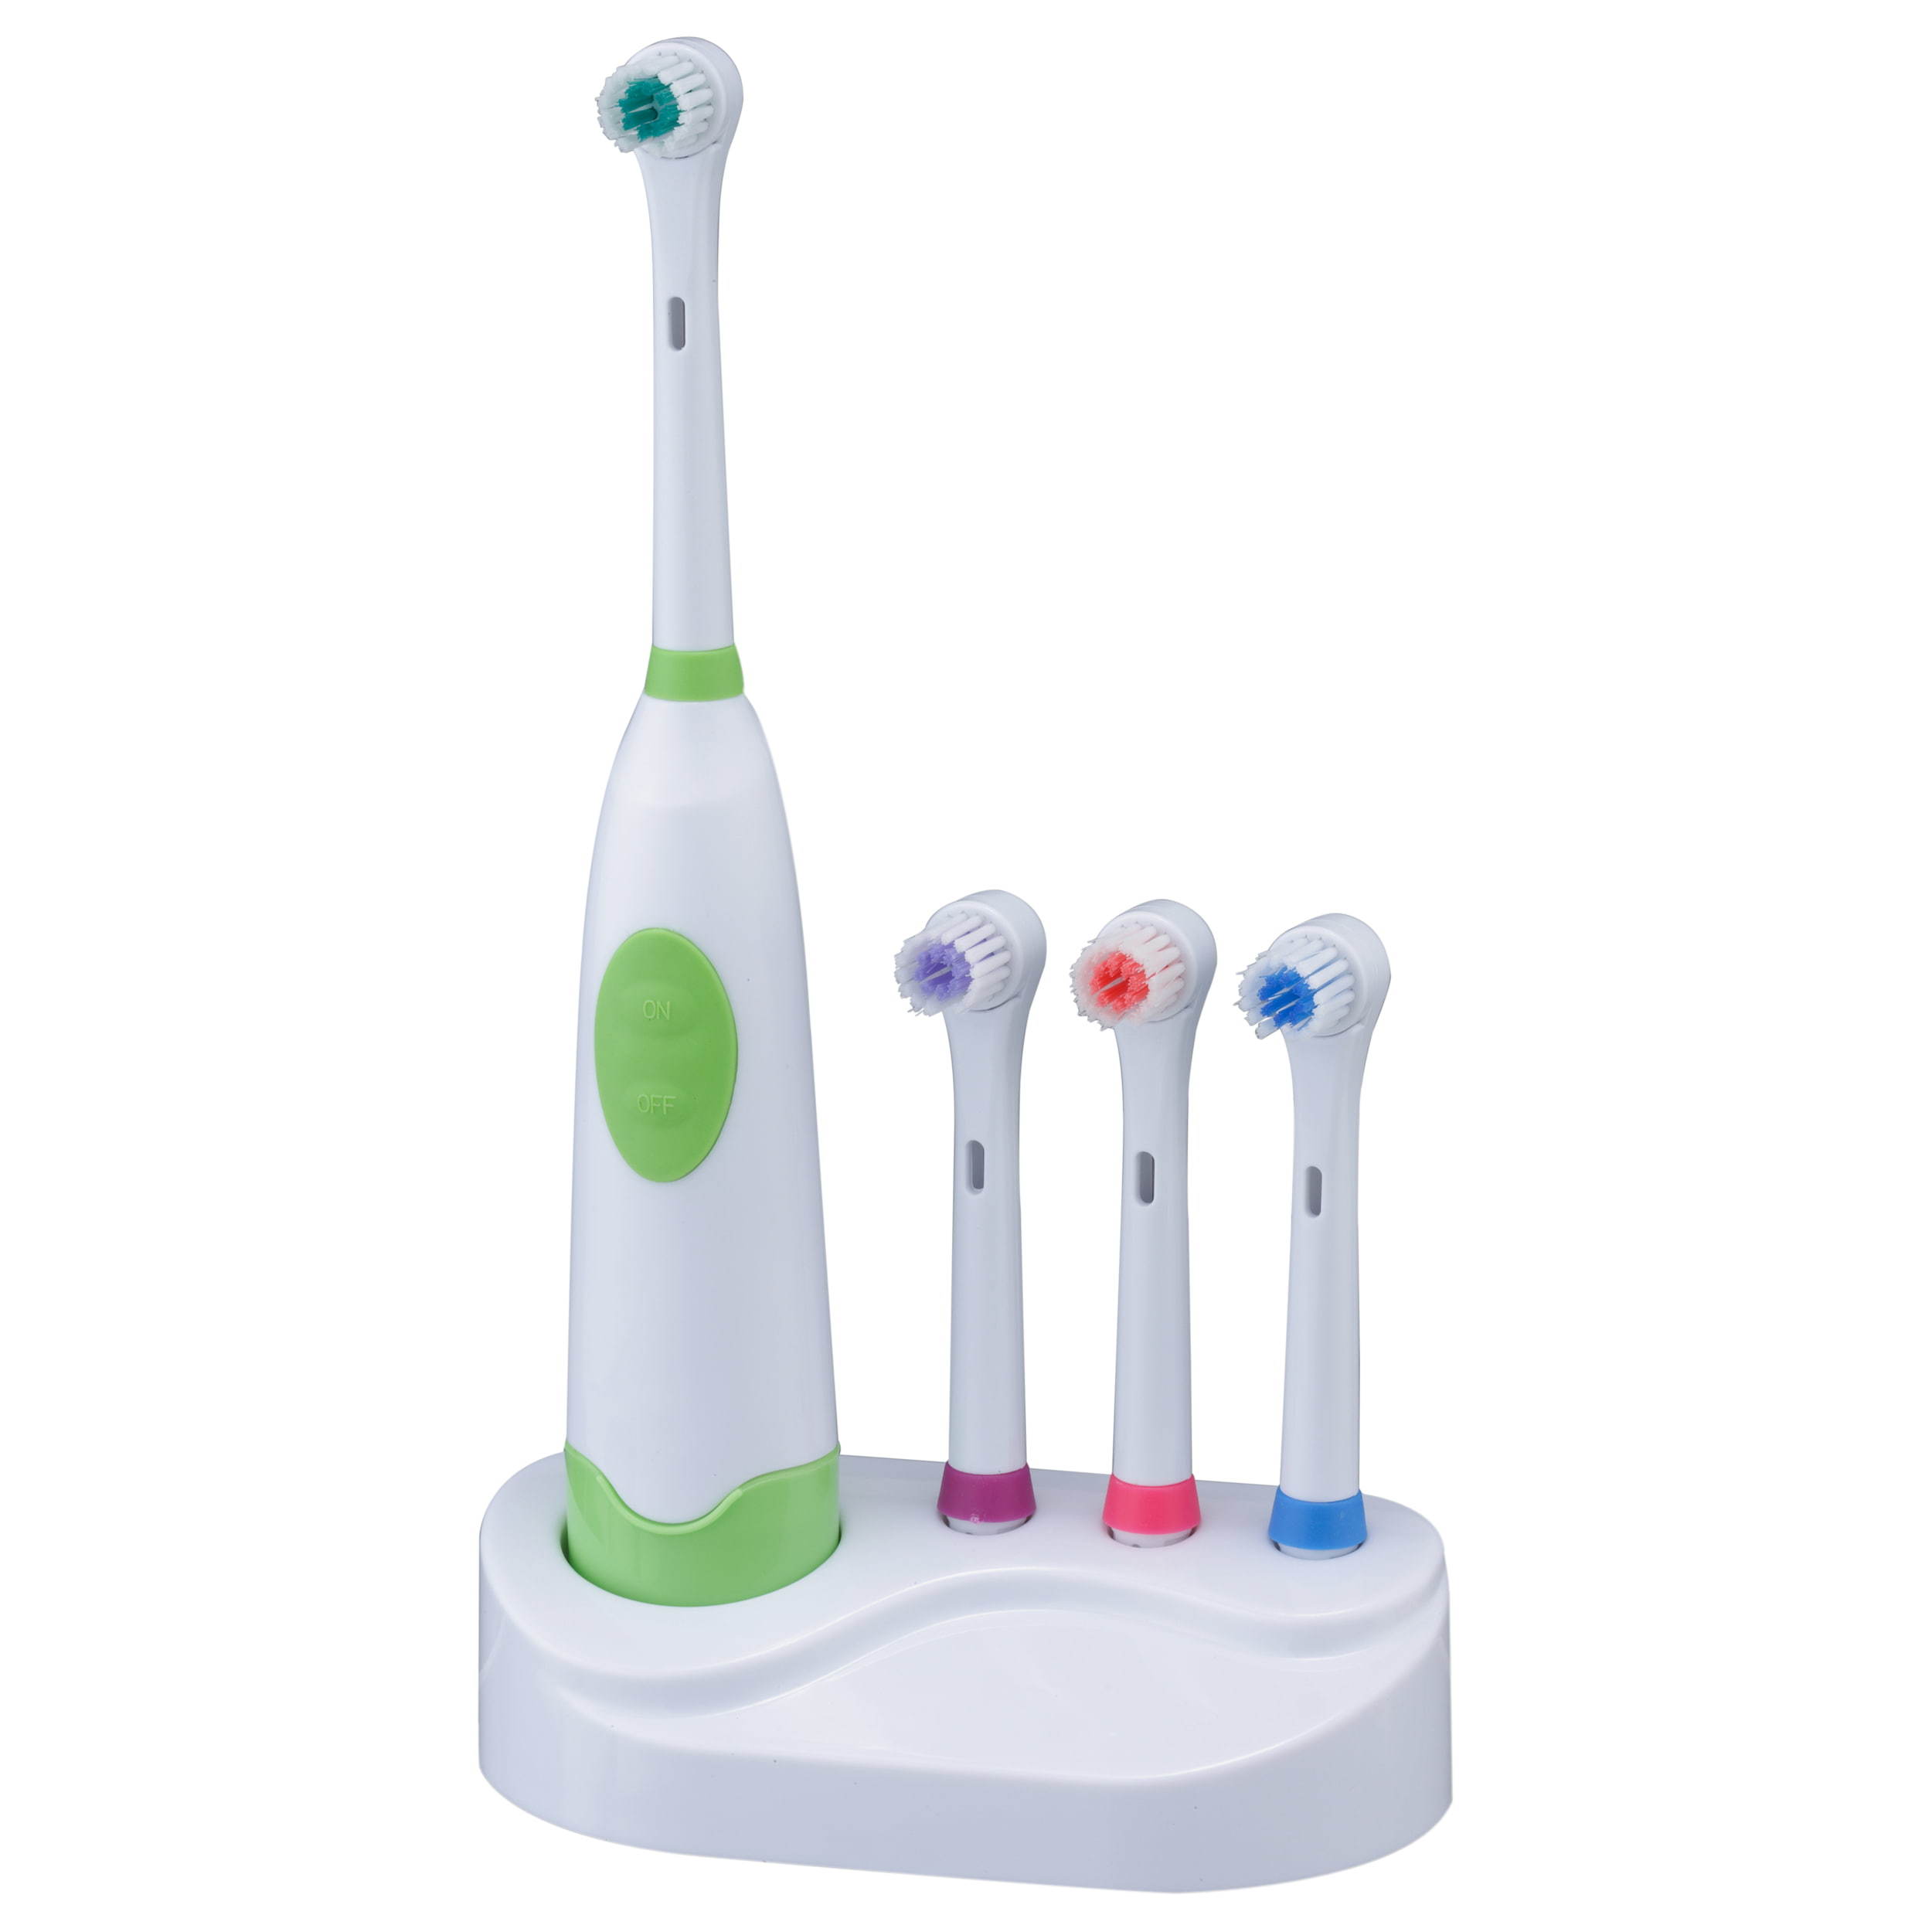 KHET003-3 Electric Battery Toothbrush Perfect For Teeth Whitening And Cleaning With Three Refill Brush Heads Family Kit 